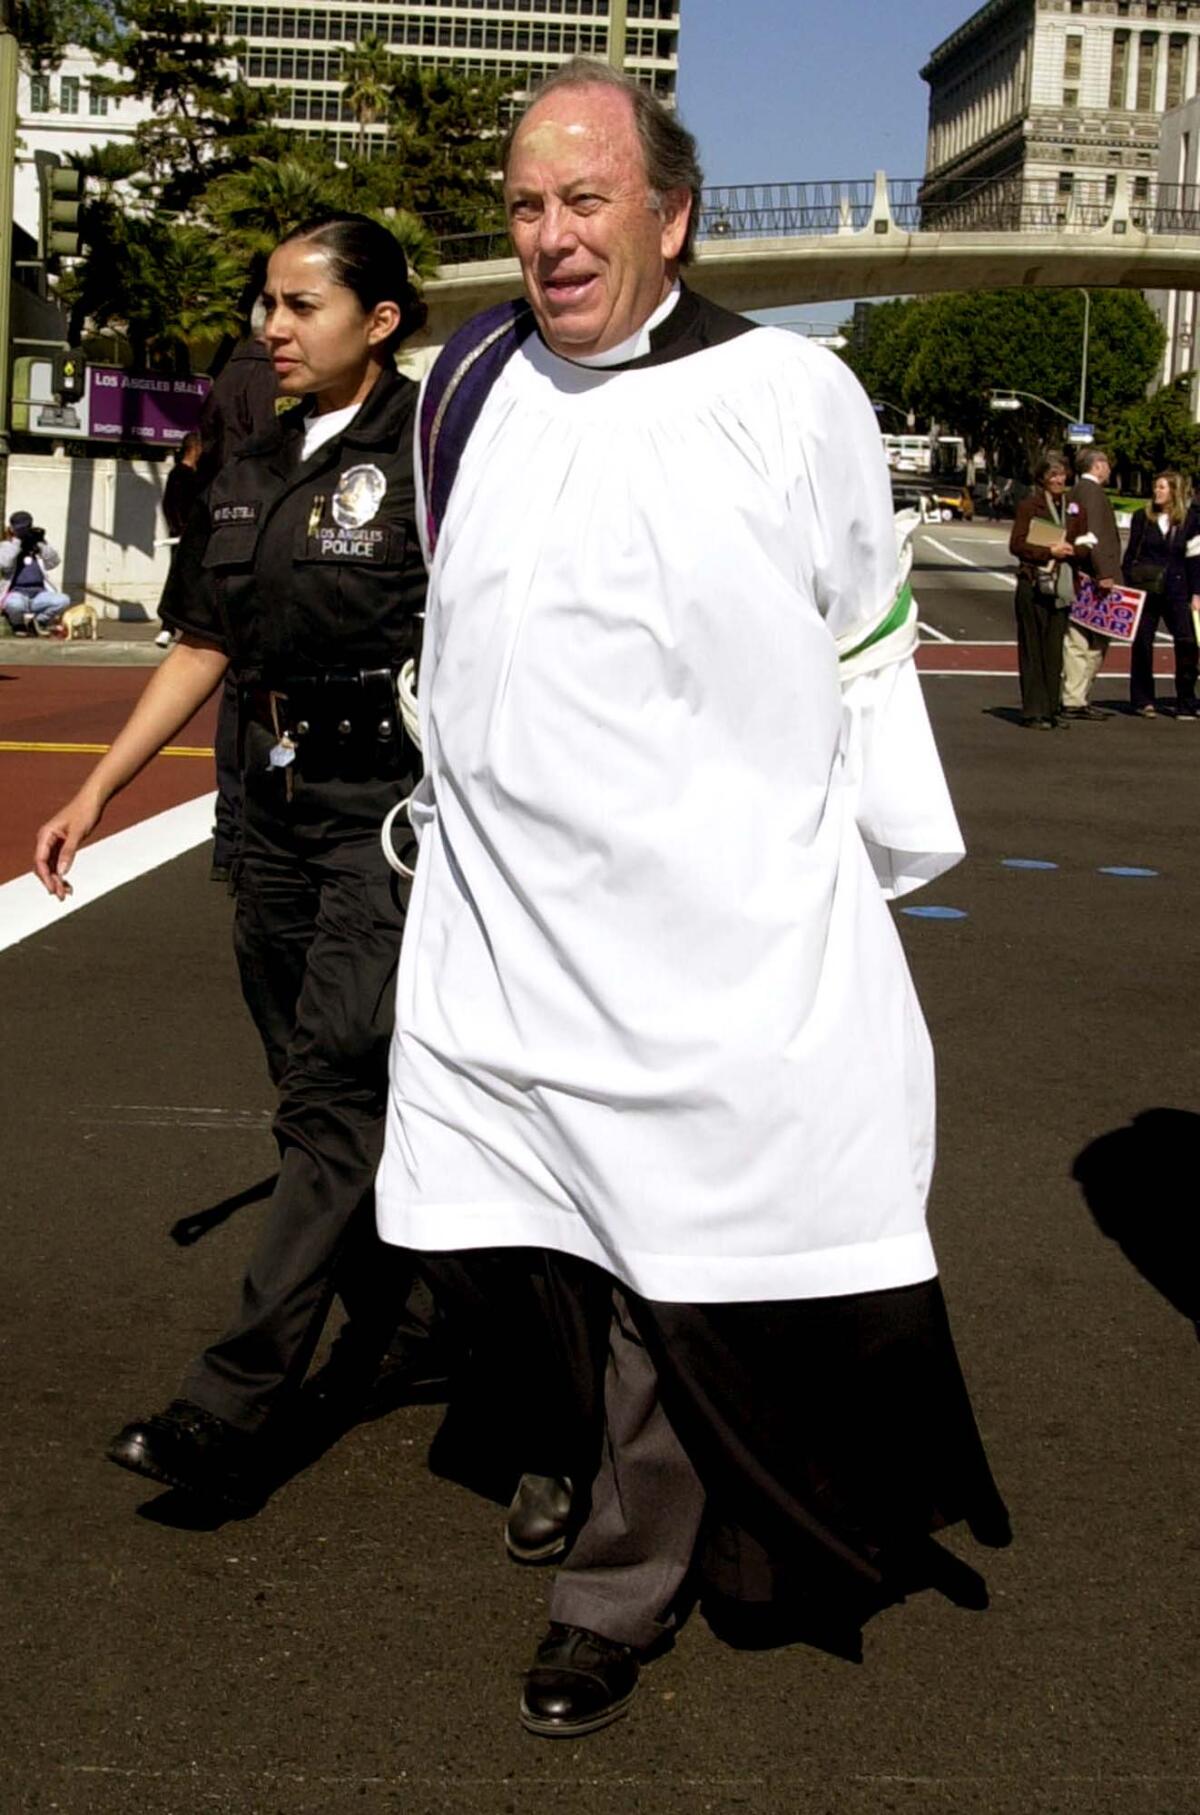 Los Angeles police arrest George Regas during a 2003 protest against the Iraq invasion.